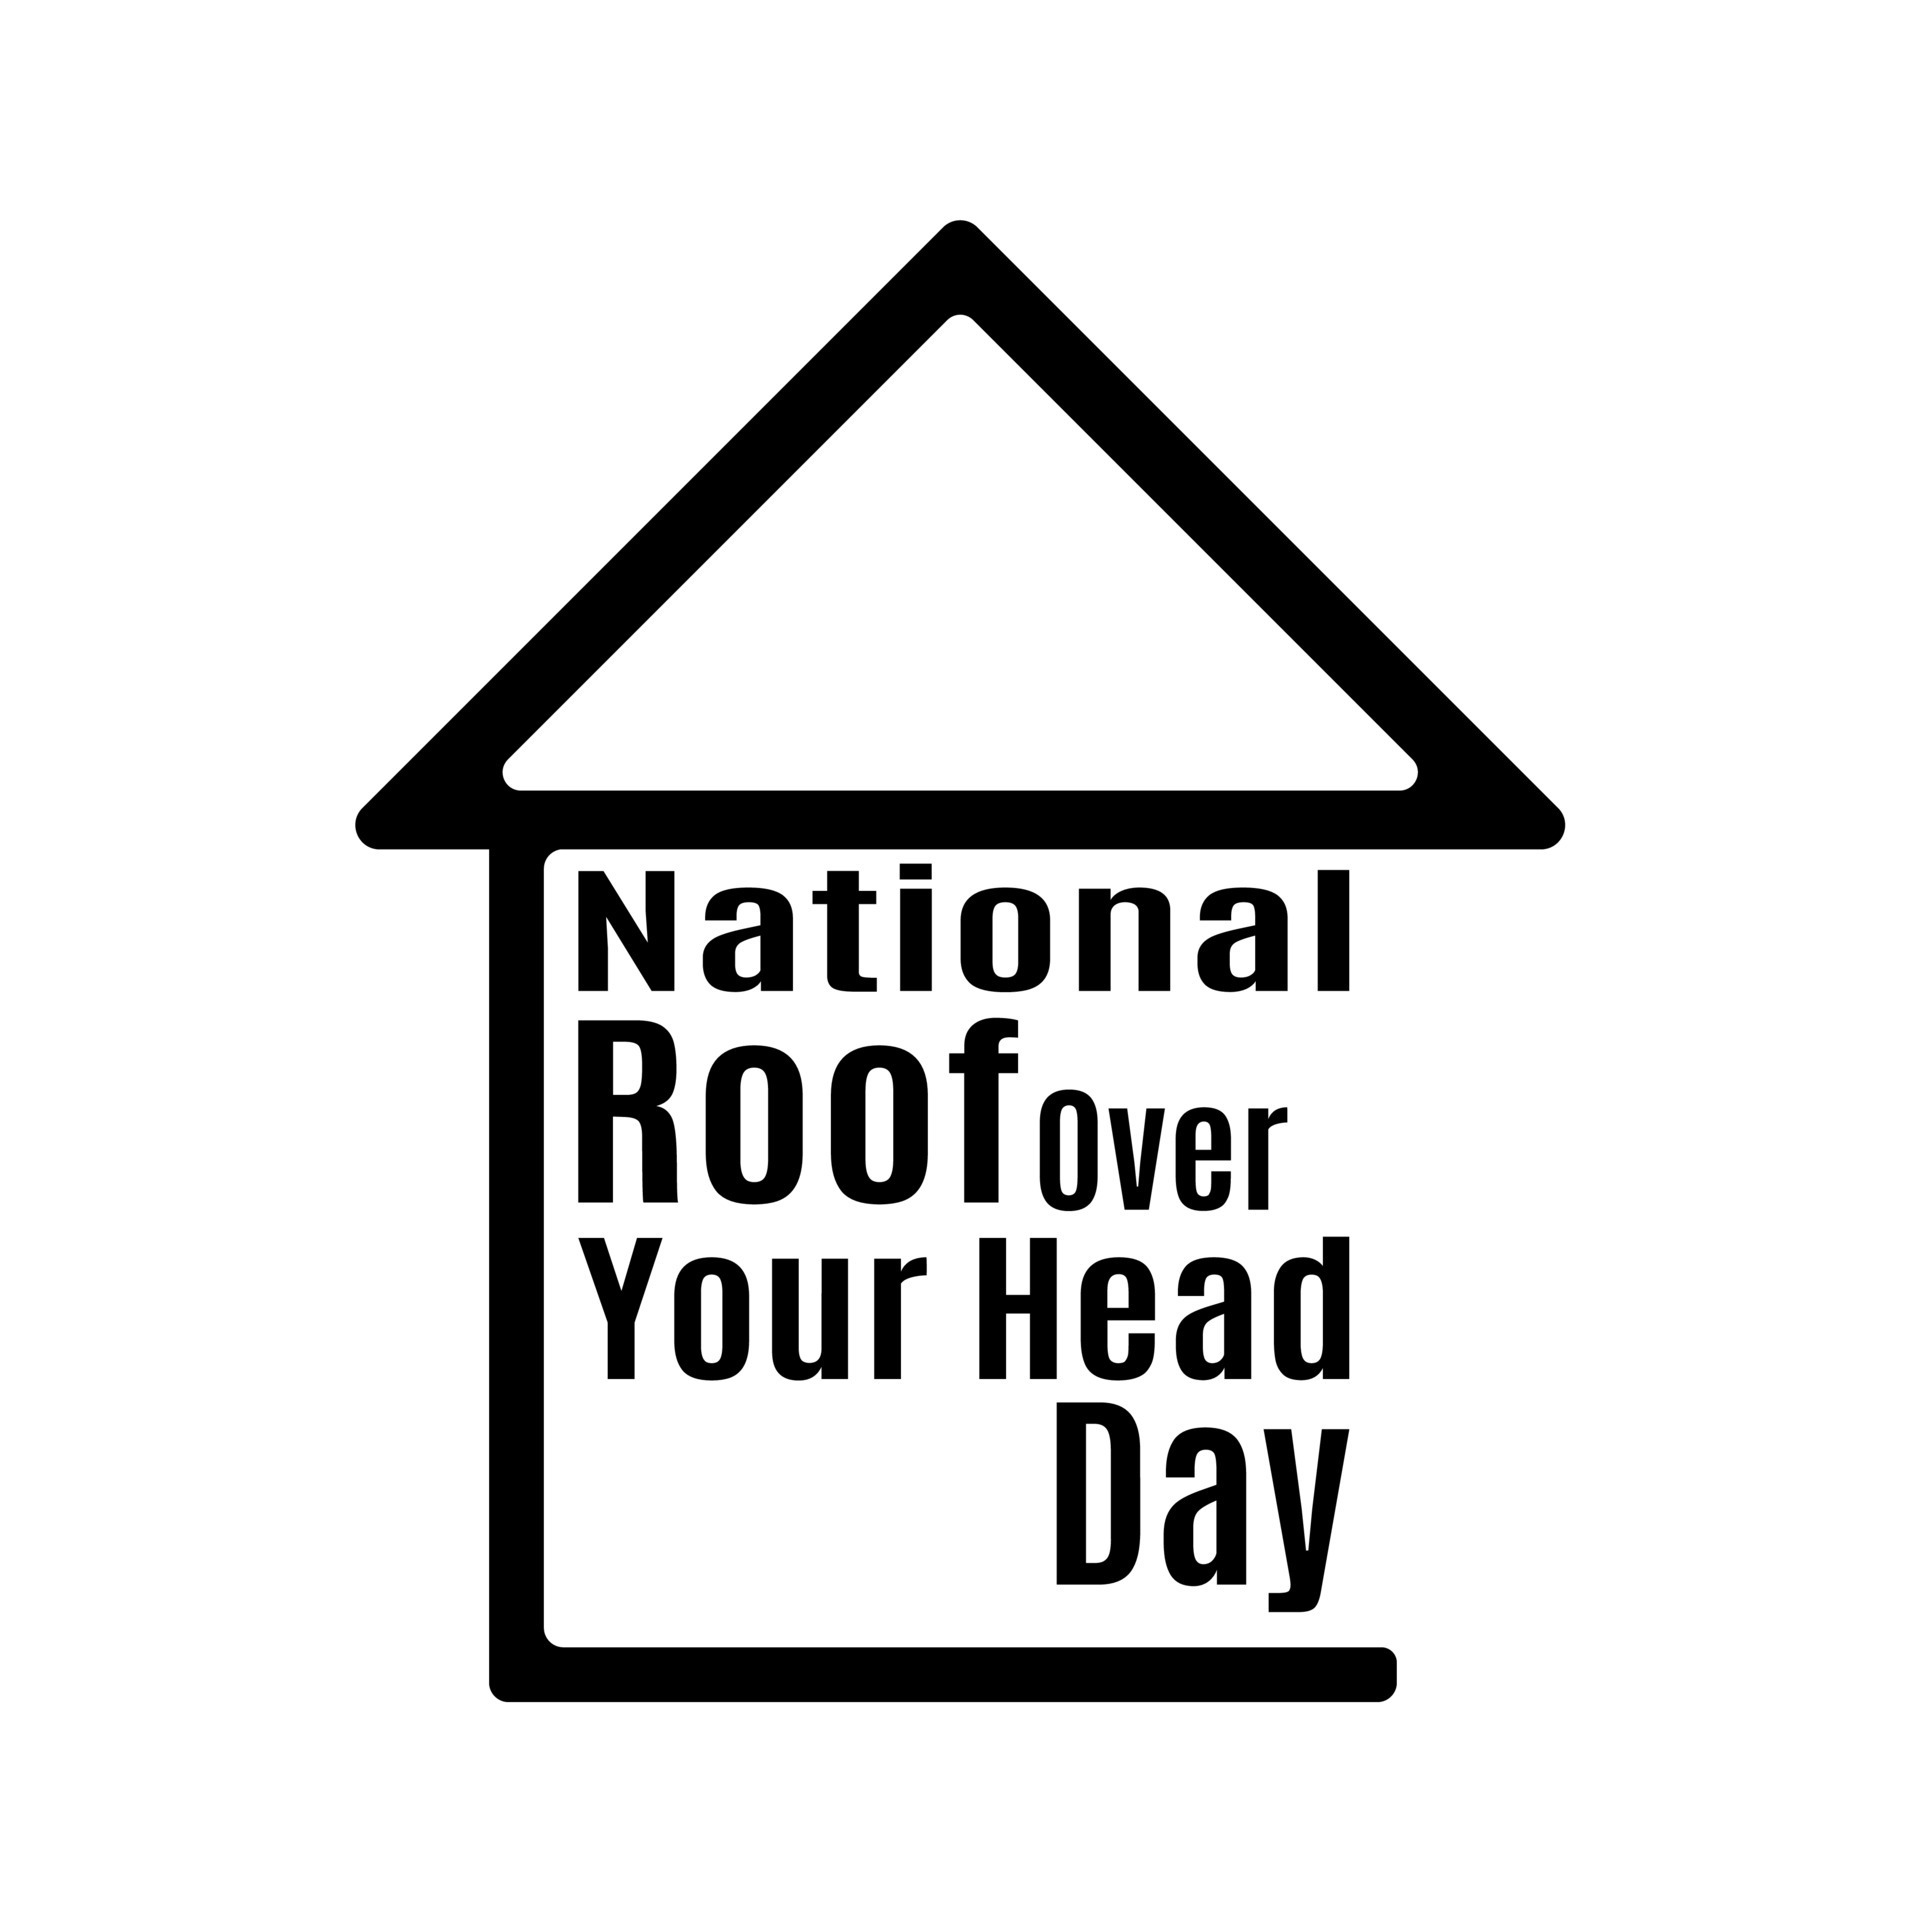 National Roof Over Your Head Day, Idea for poster, banner, flyer or